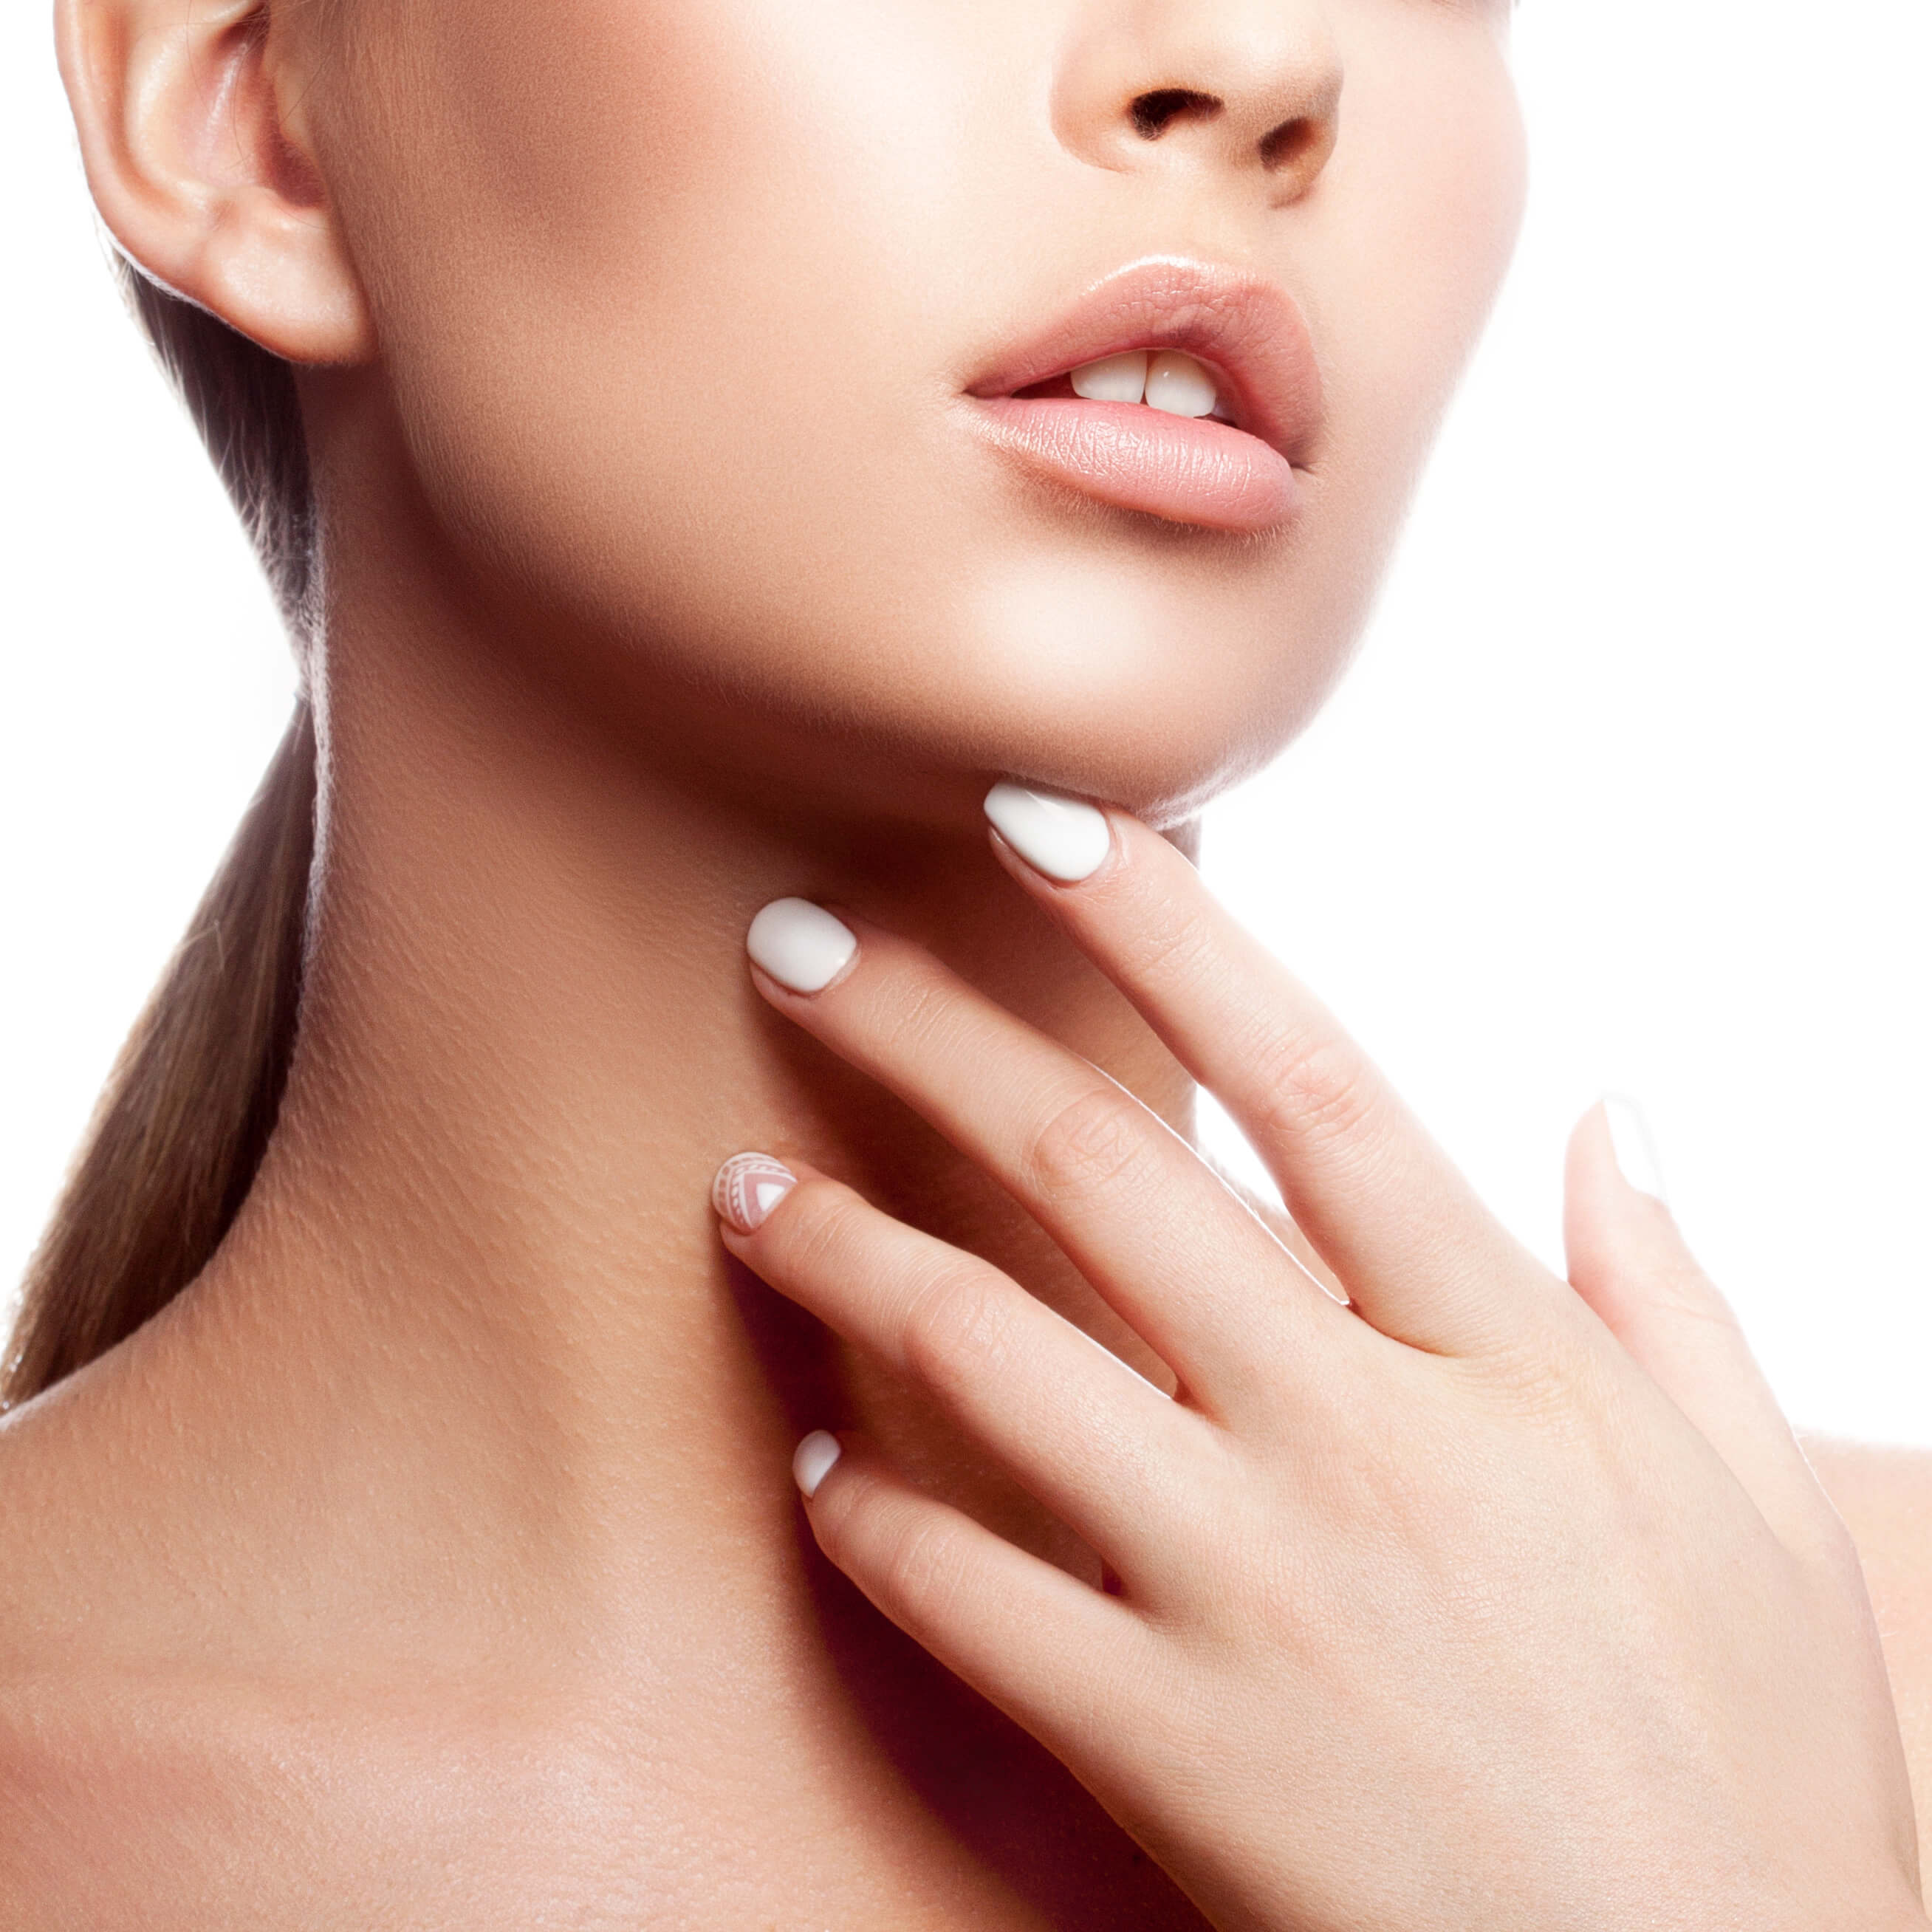 Dermal Fillers - Everything You Need To Know